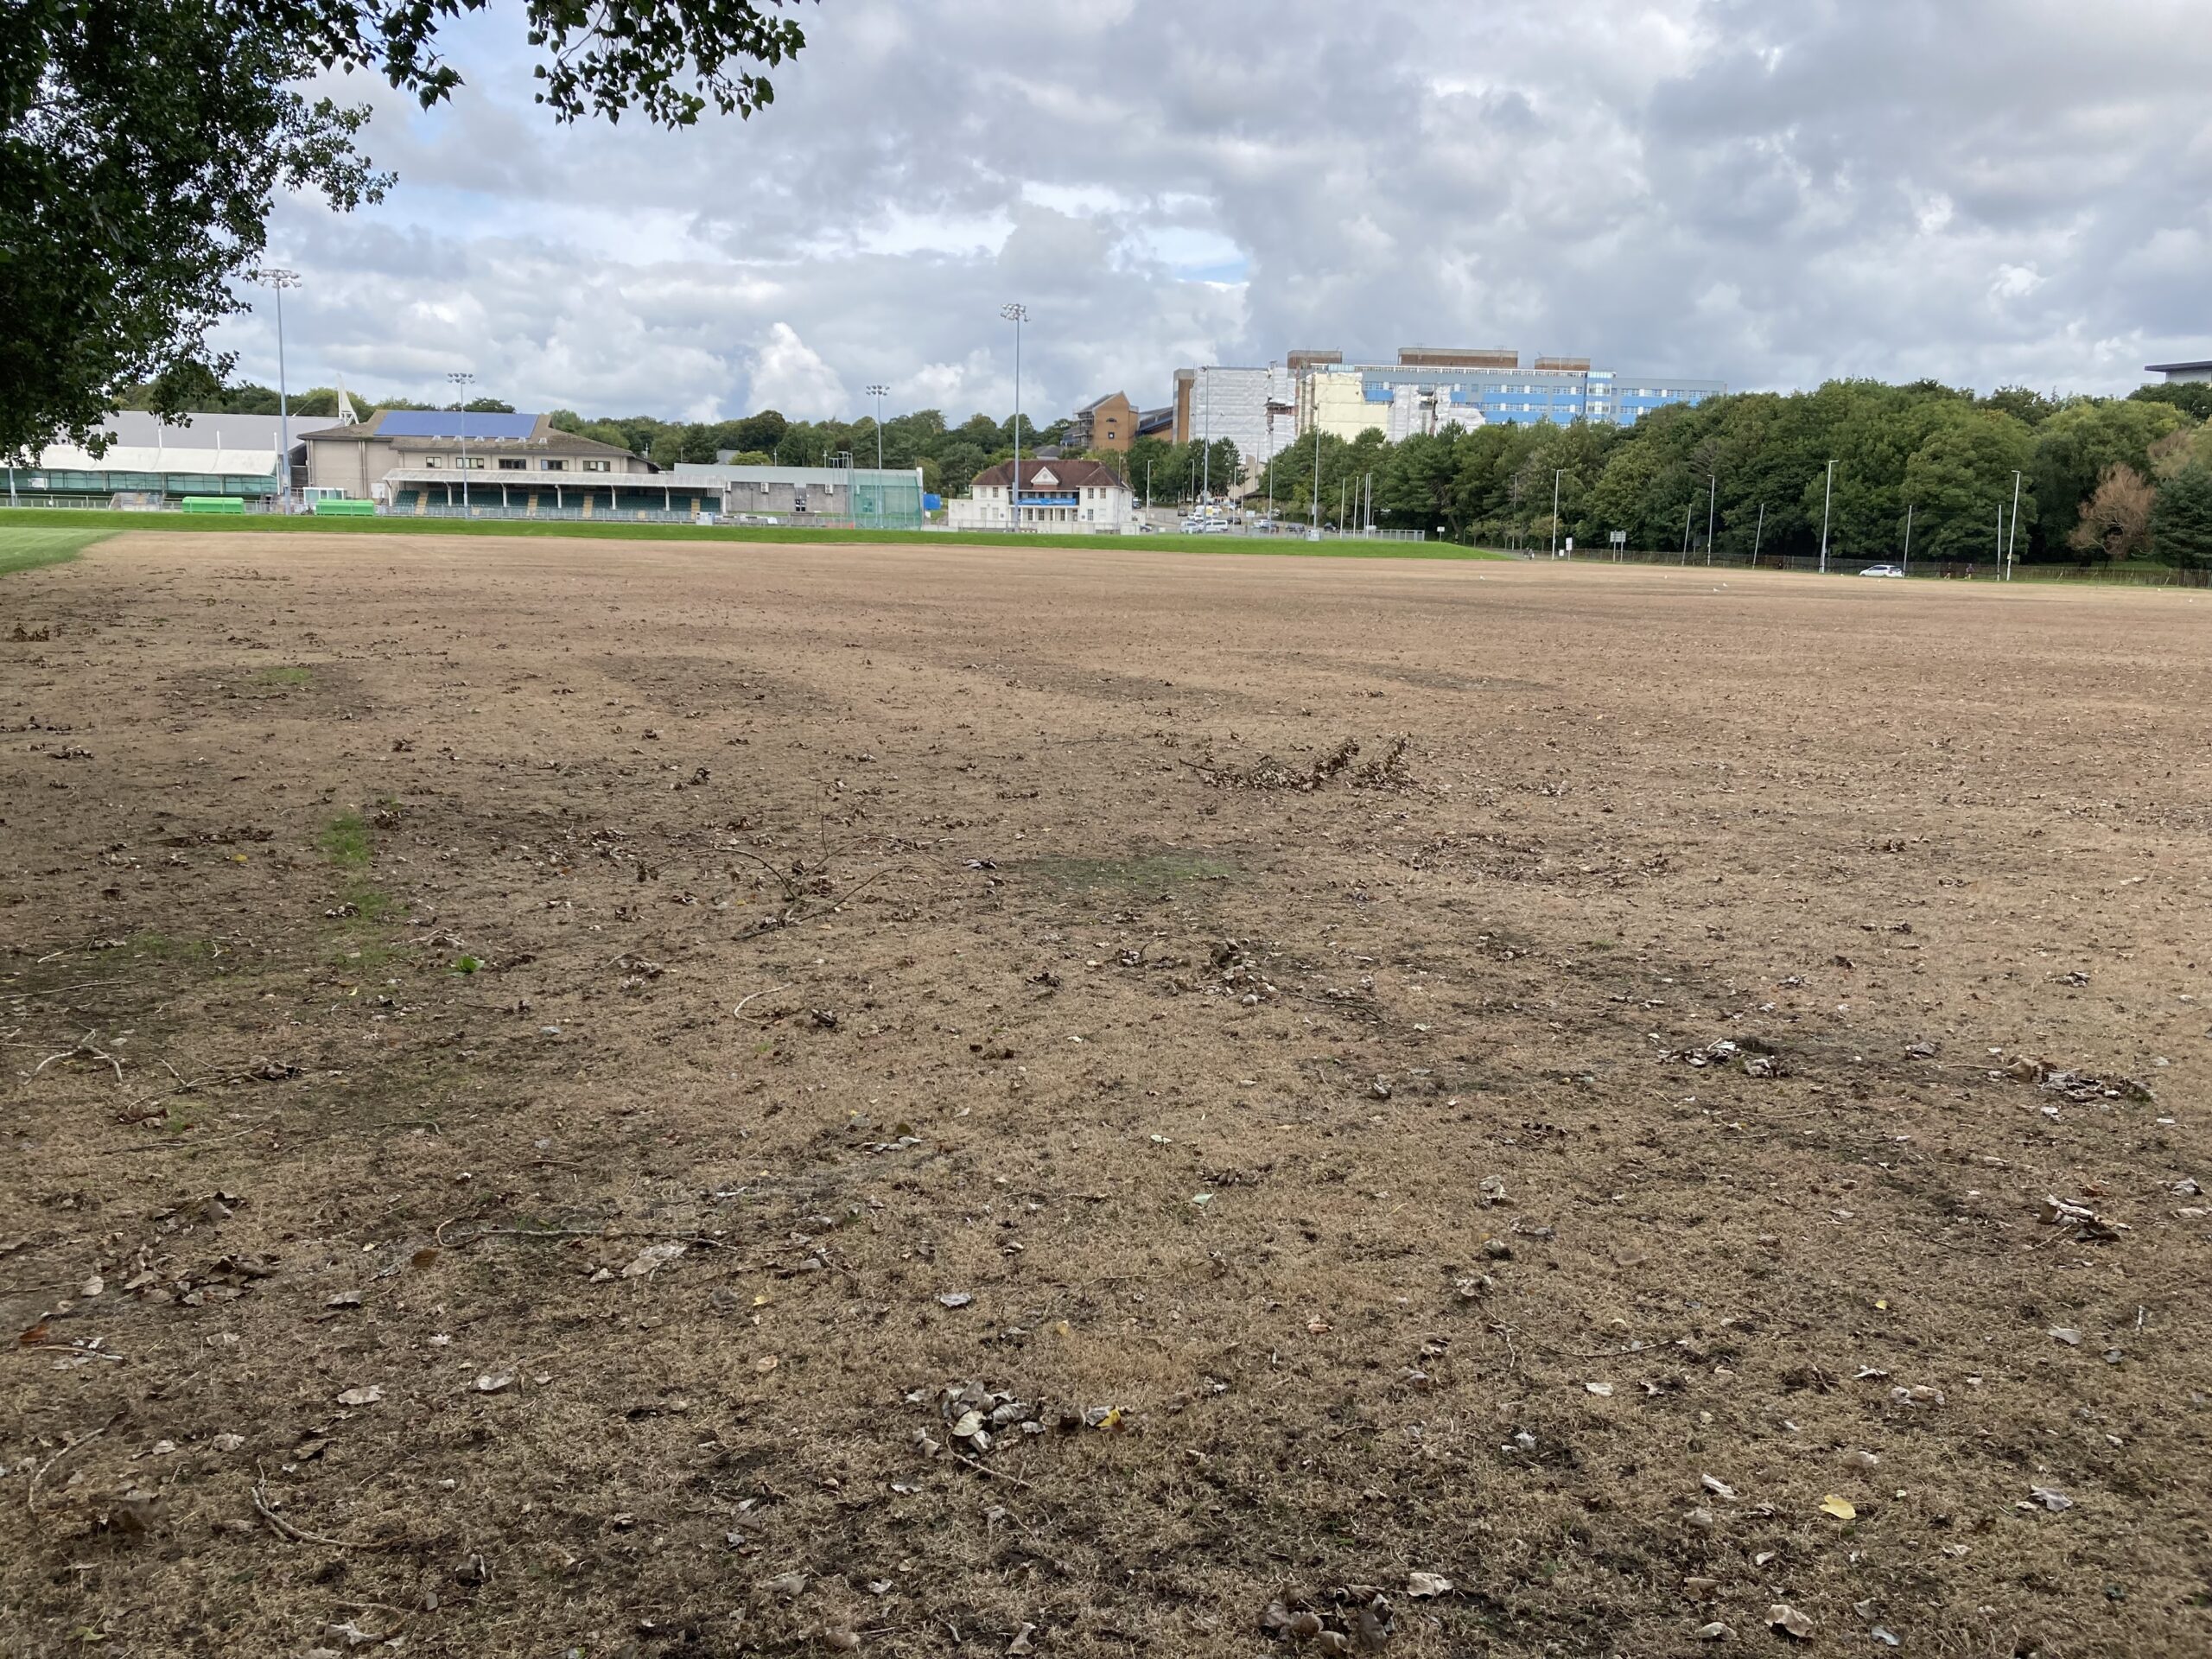 Swathe of brown on playing fields baffles Sketty community